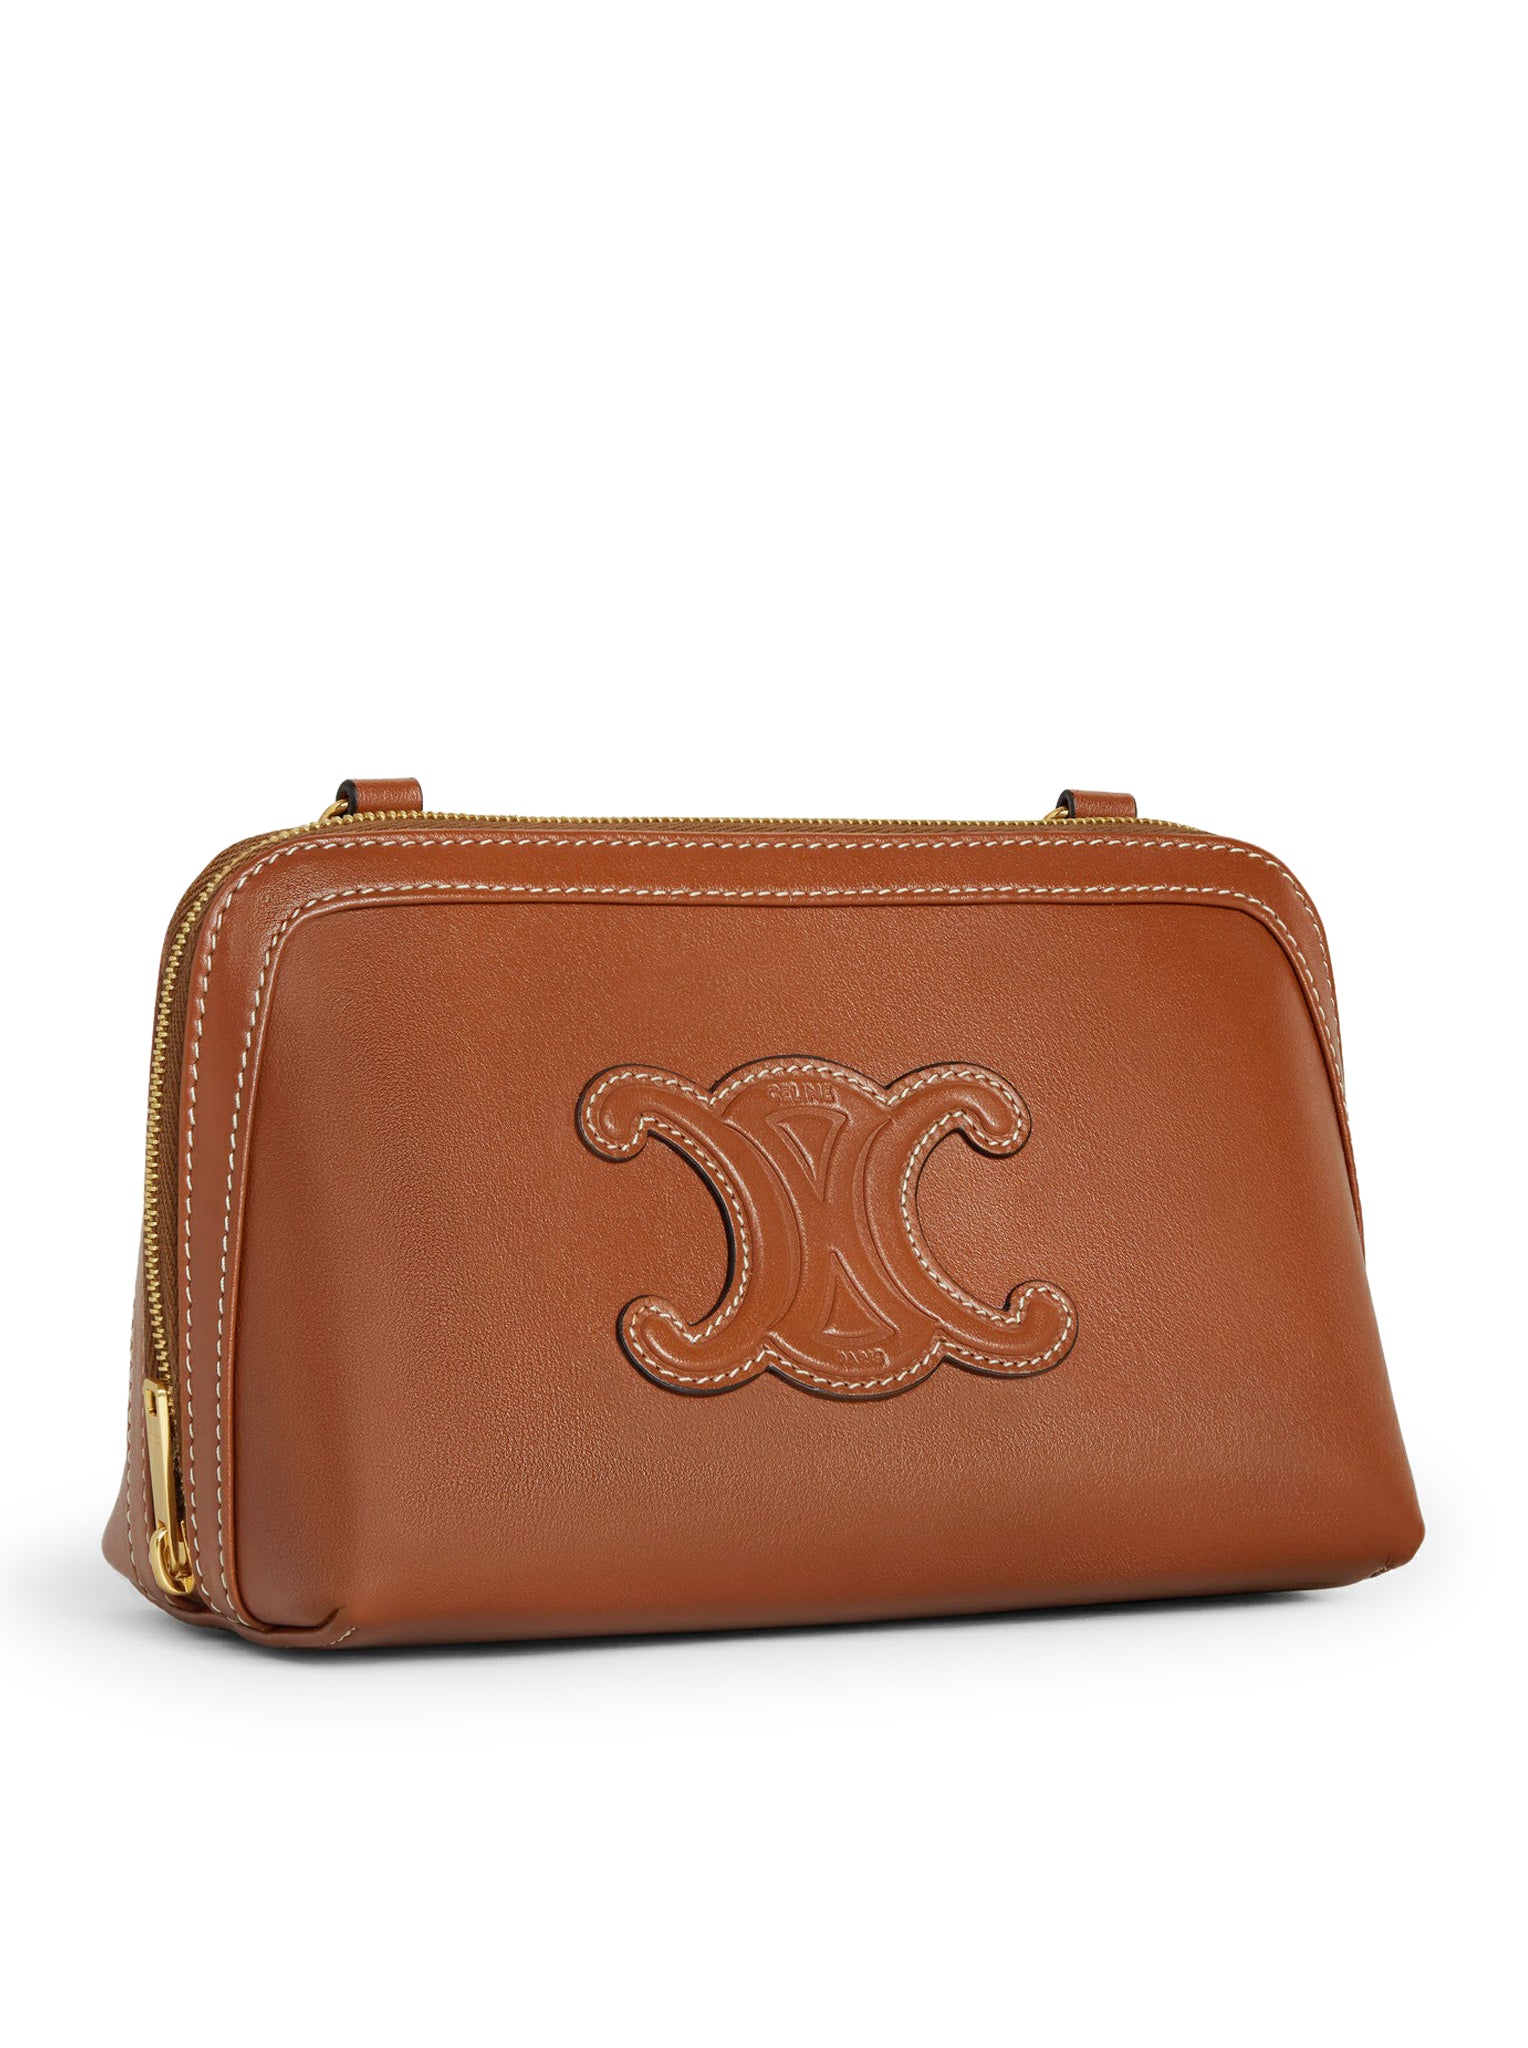 CUIR TRIOMPHE CLUTCH WITH CHAIN IN SMOOTH CALFSKIN